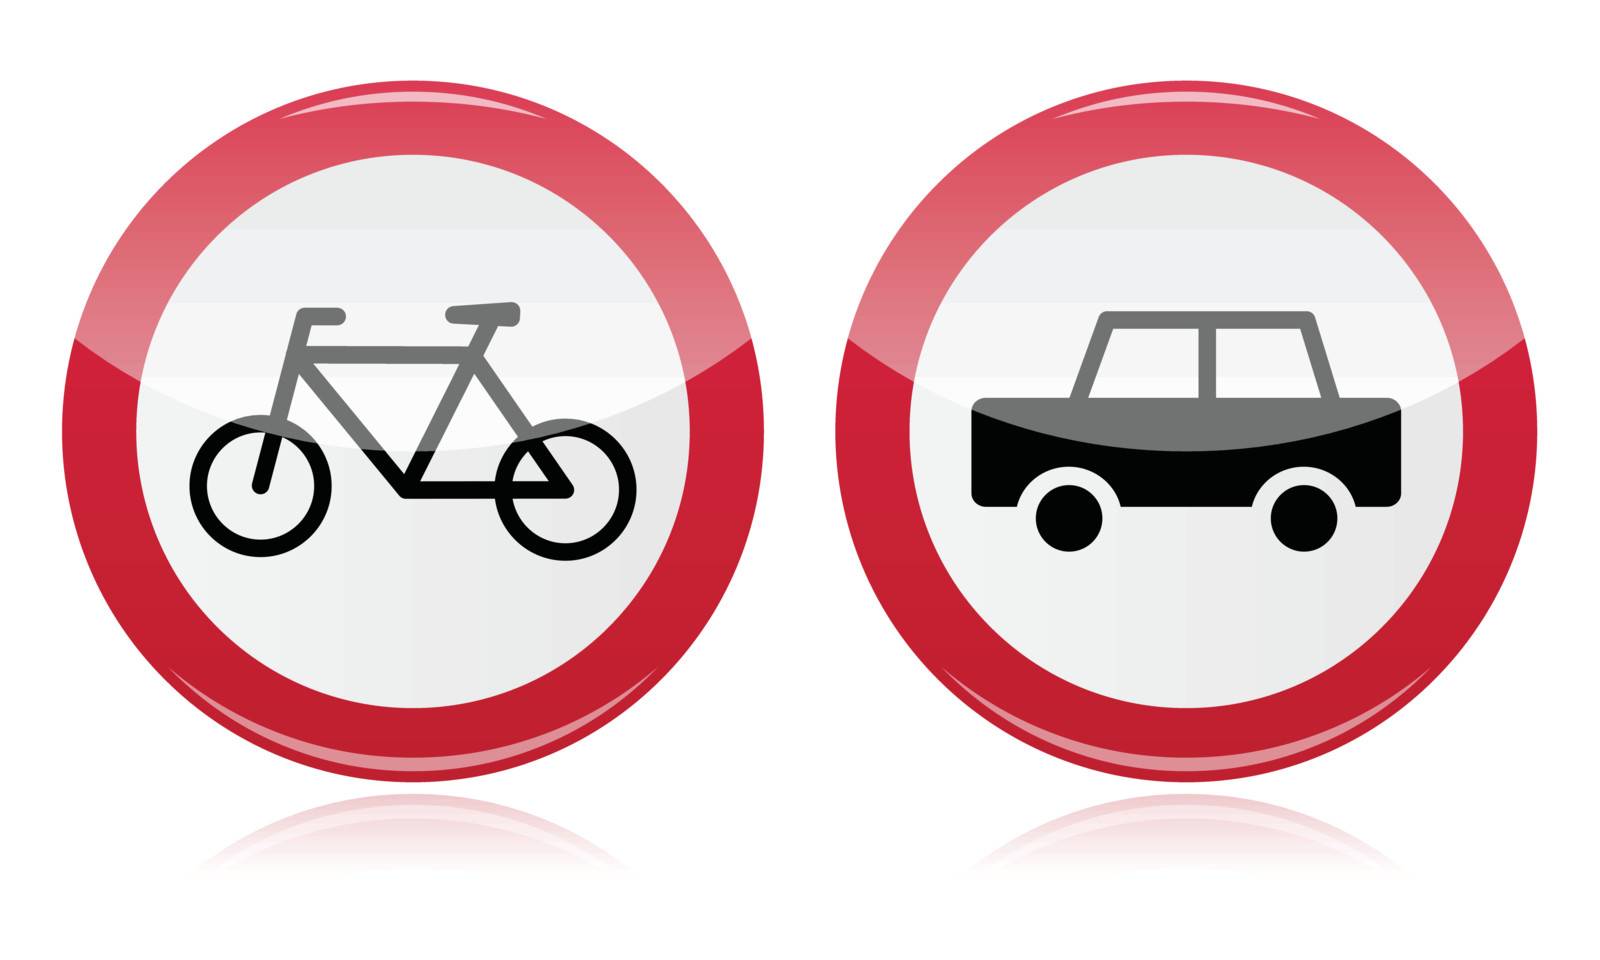 Car and bike icons road signs by RedKoala